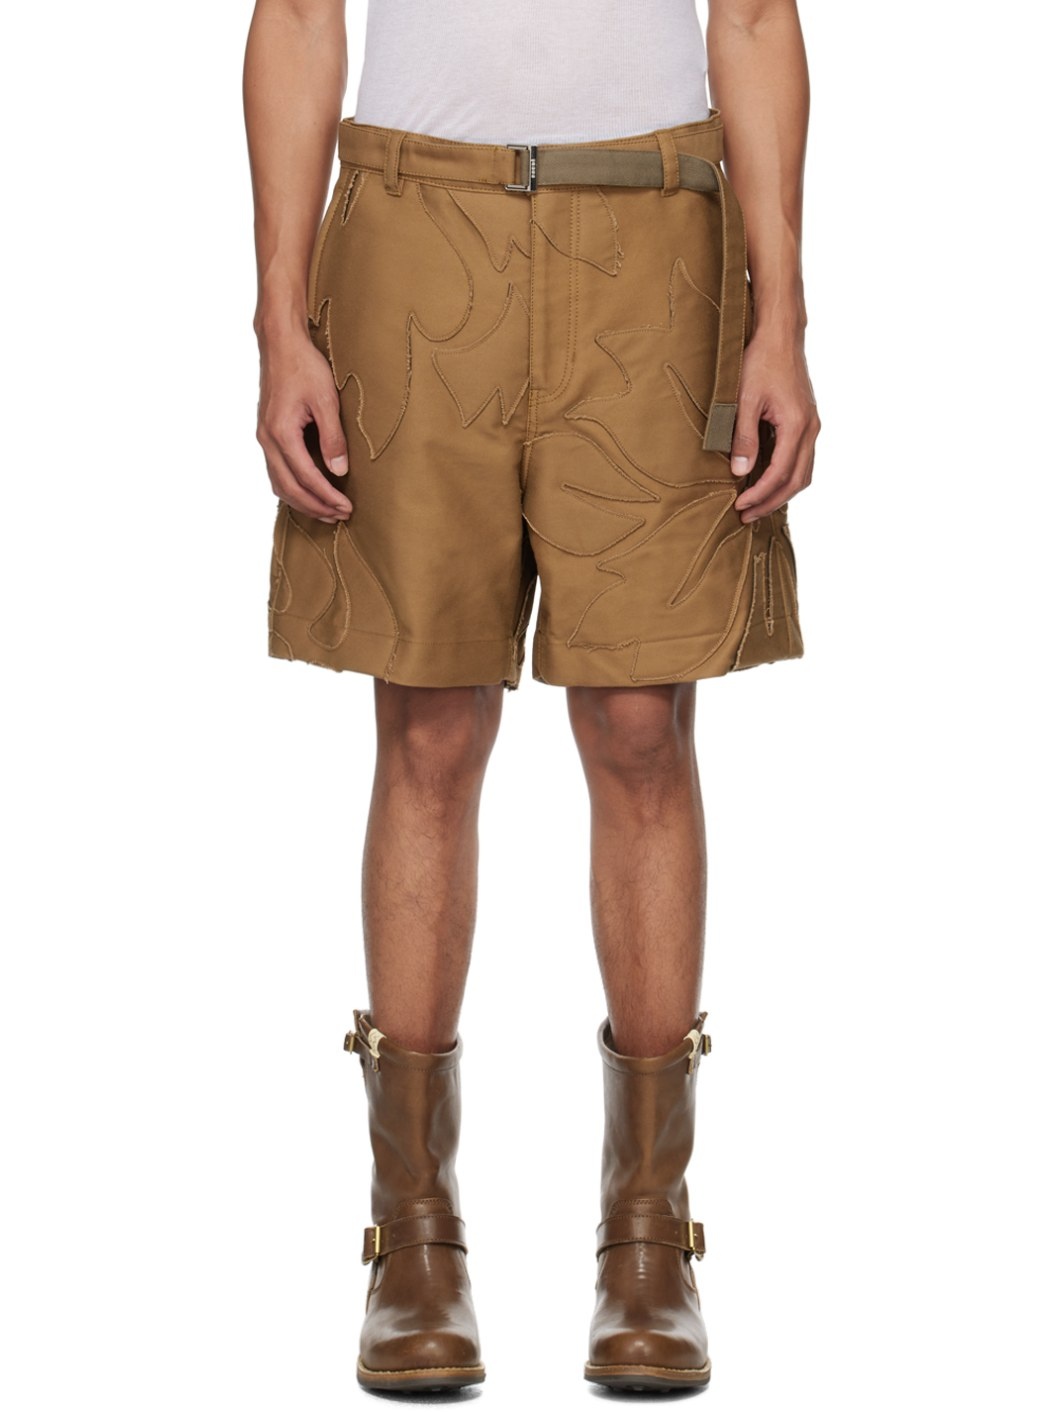 Tan Embroidered Shorts - 1